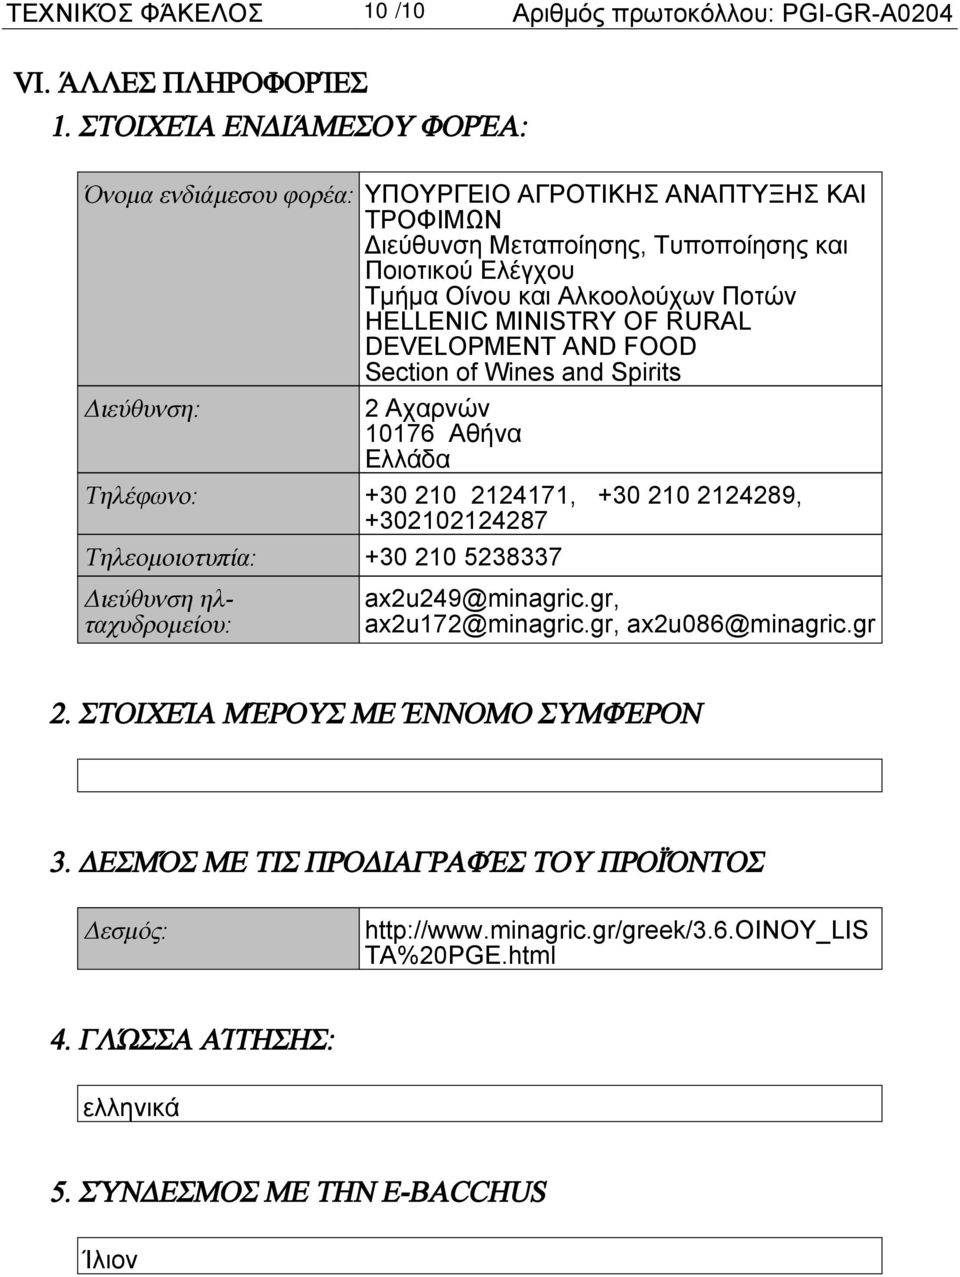 MINISTRY OF RURAL DEVELOPMENT AND FOOD Section of Wines and Spirits Διεύθυνση: 2 Αχαρνών 10176 Αθήνα Ελλάδα Τηλέφωνο: +30 210 2124171, +30 210 2124289, +302102124287 Τηλεομοιοτυπία: +30 210